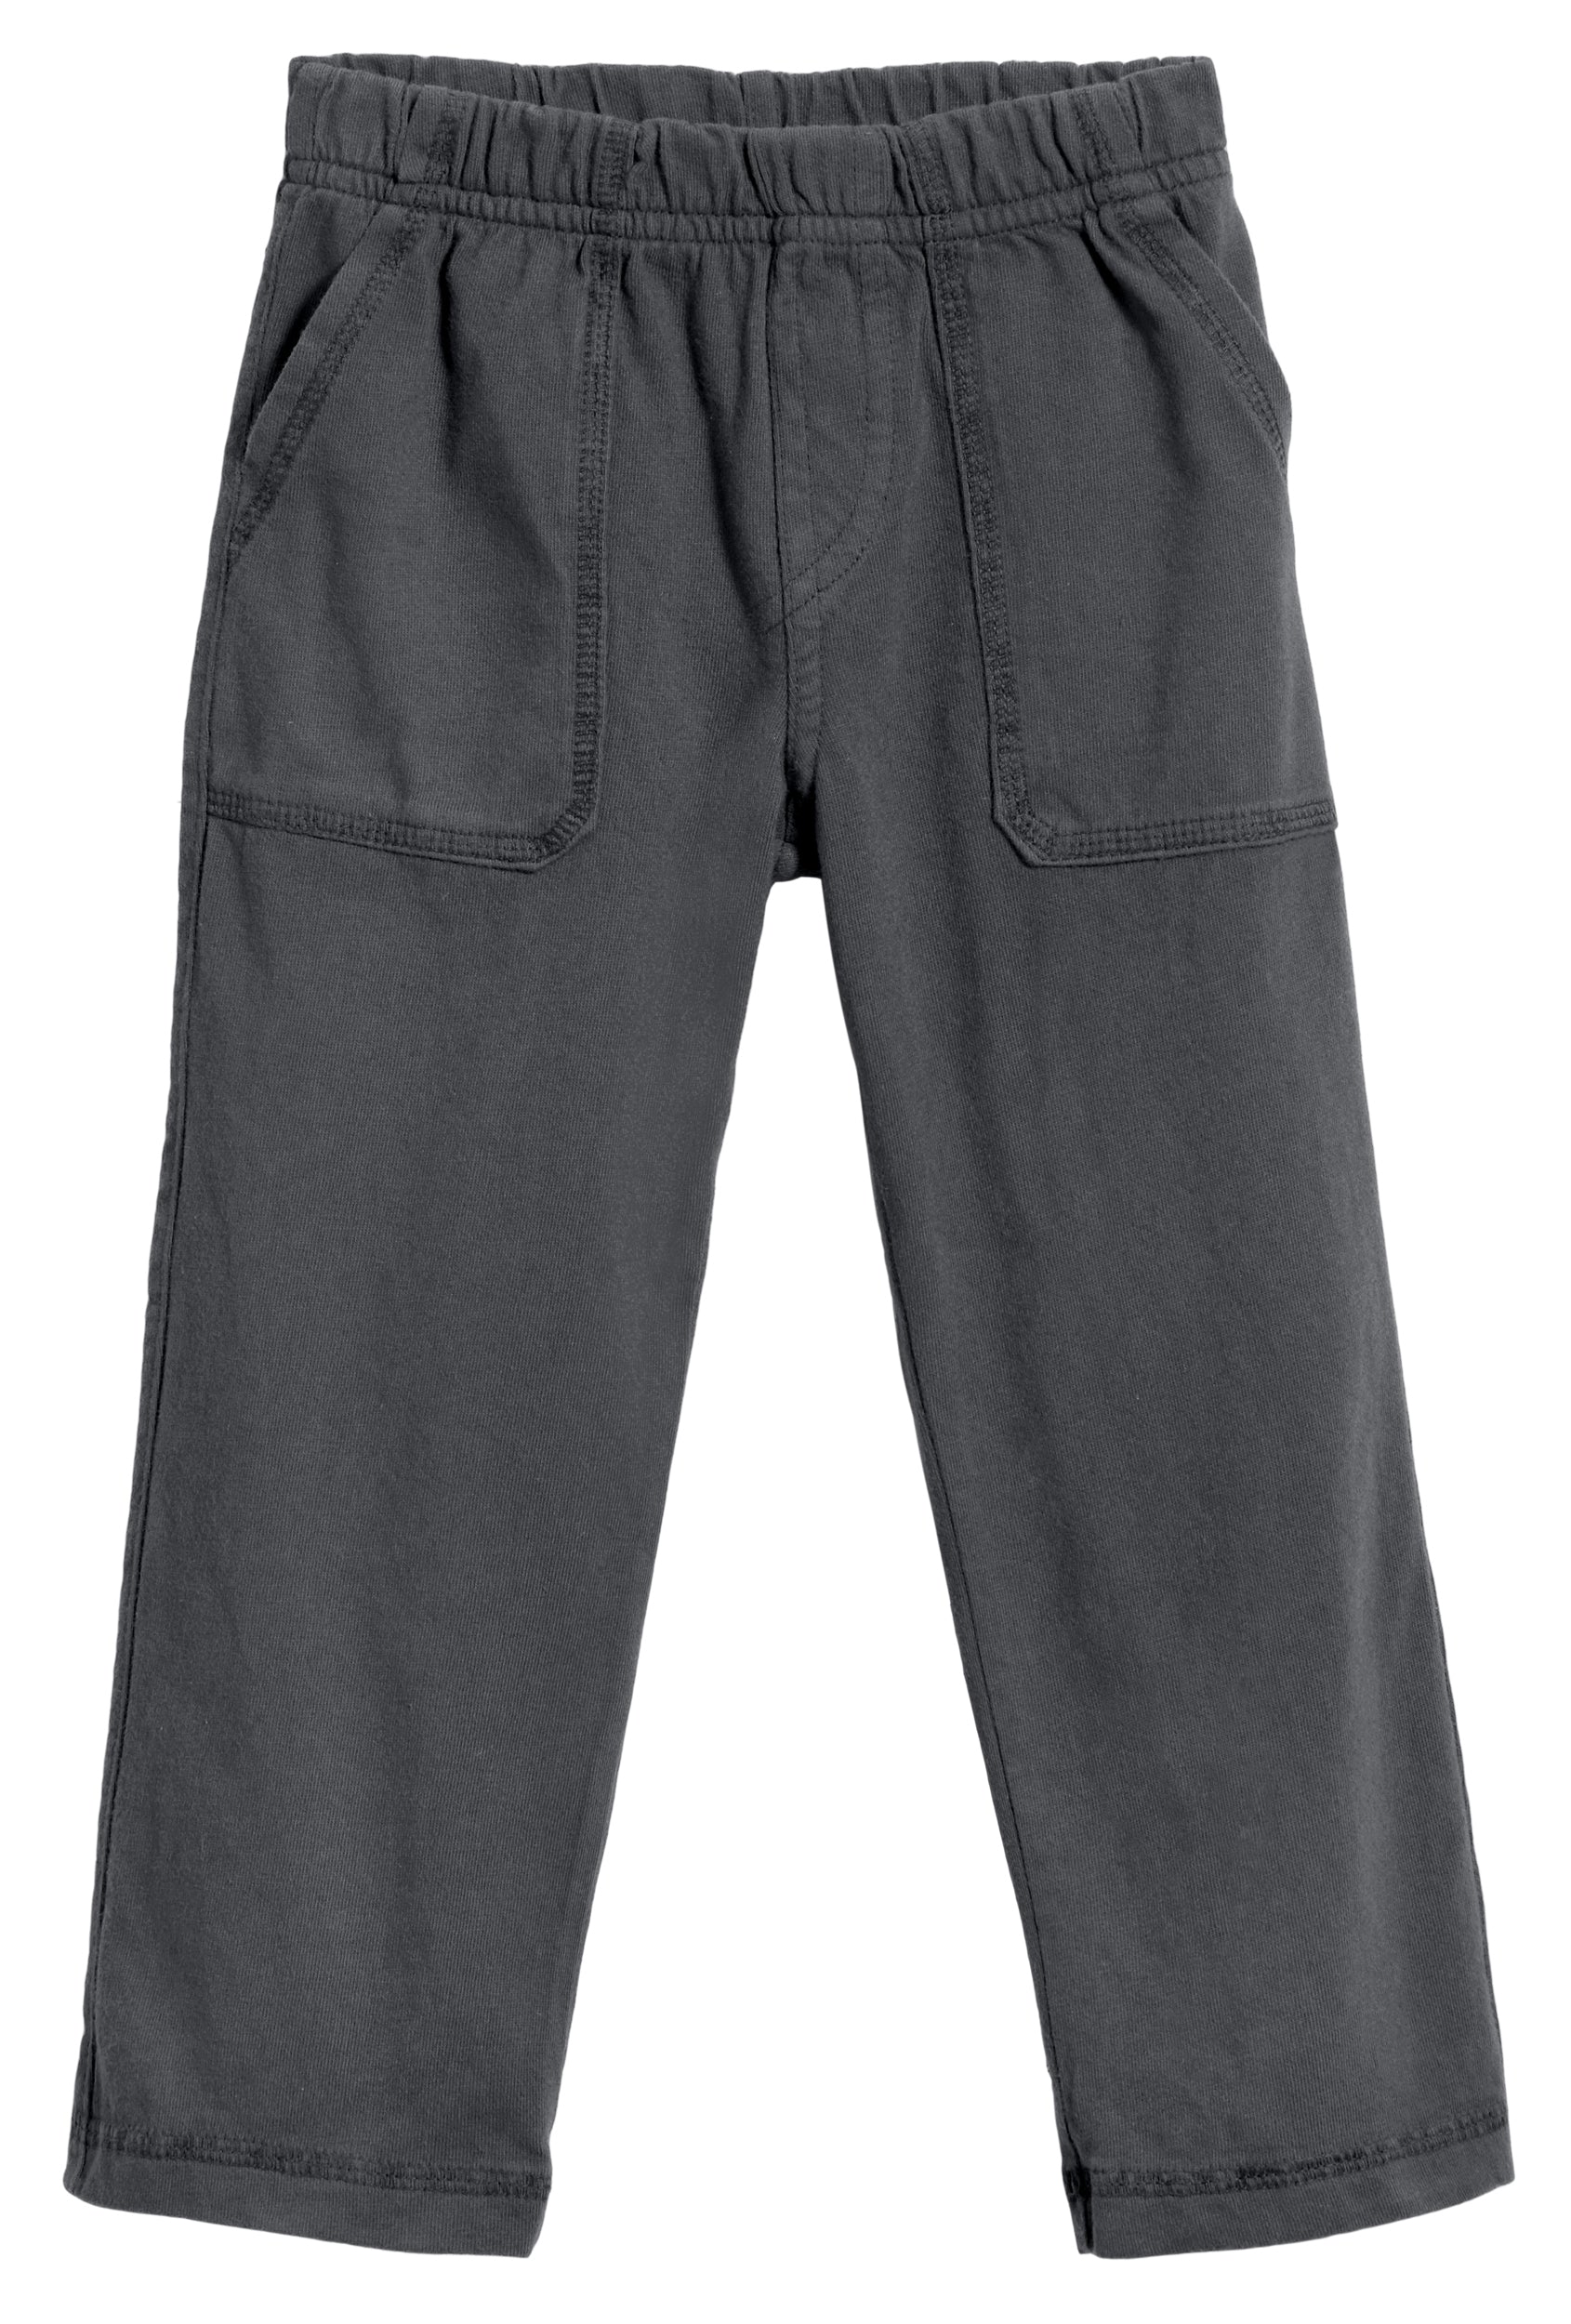 14 Best Joggers for Men (Best Style and Versatility)